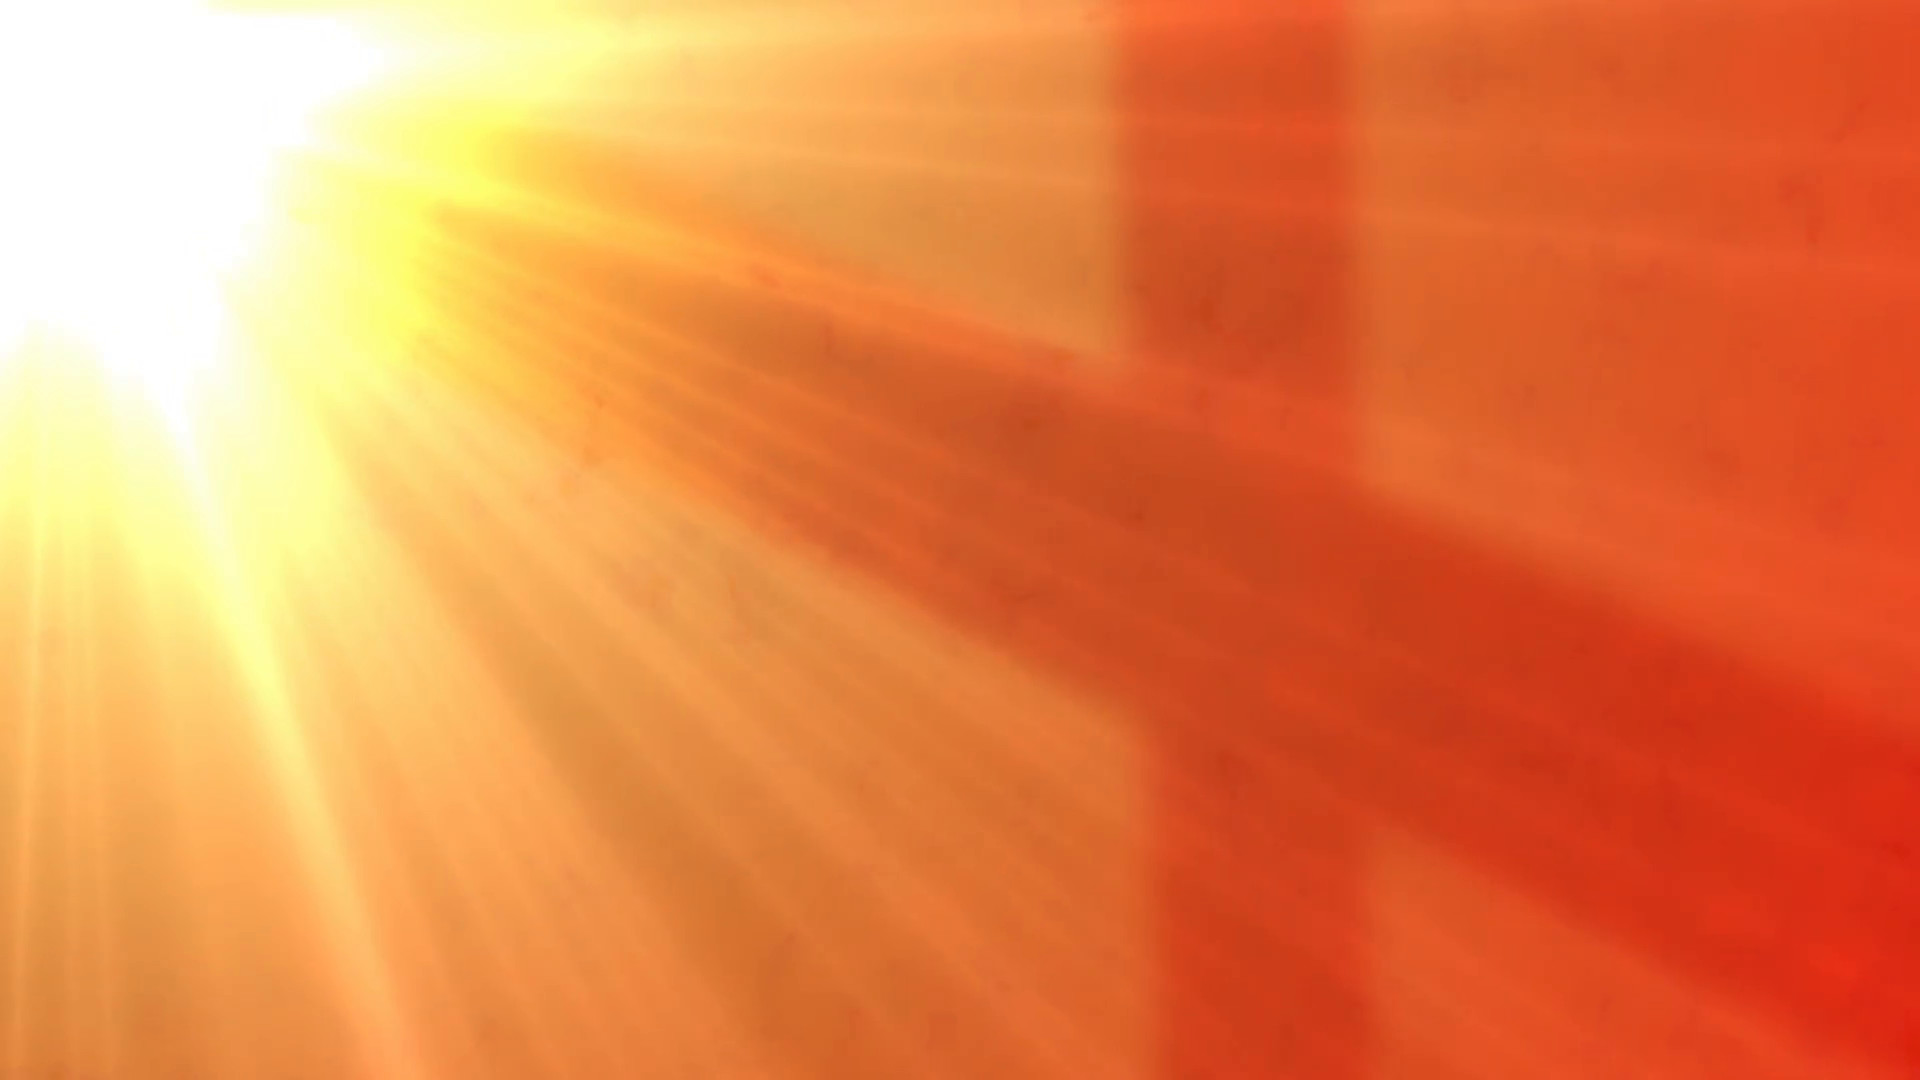 1920x1080 Christian - Religious Background - Orange/Yellow - Sunset/rise with cross  silhouette on clouds - Loop Motion Background - Storyblocks Video